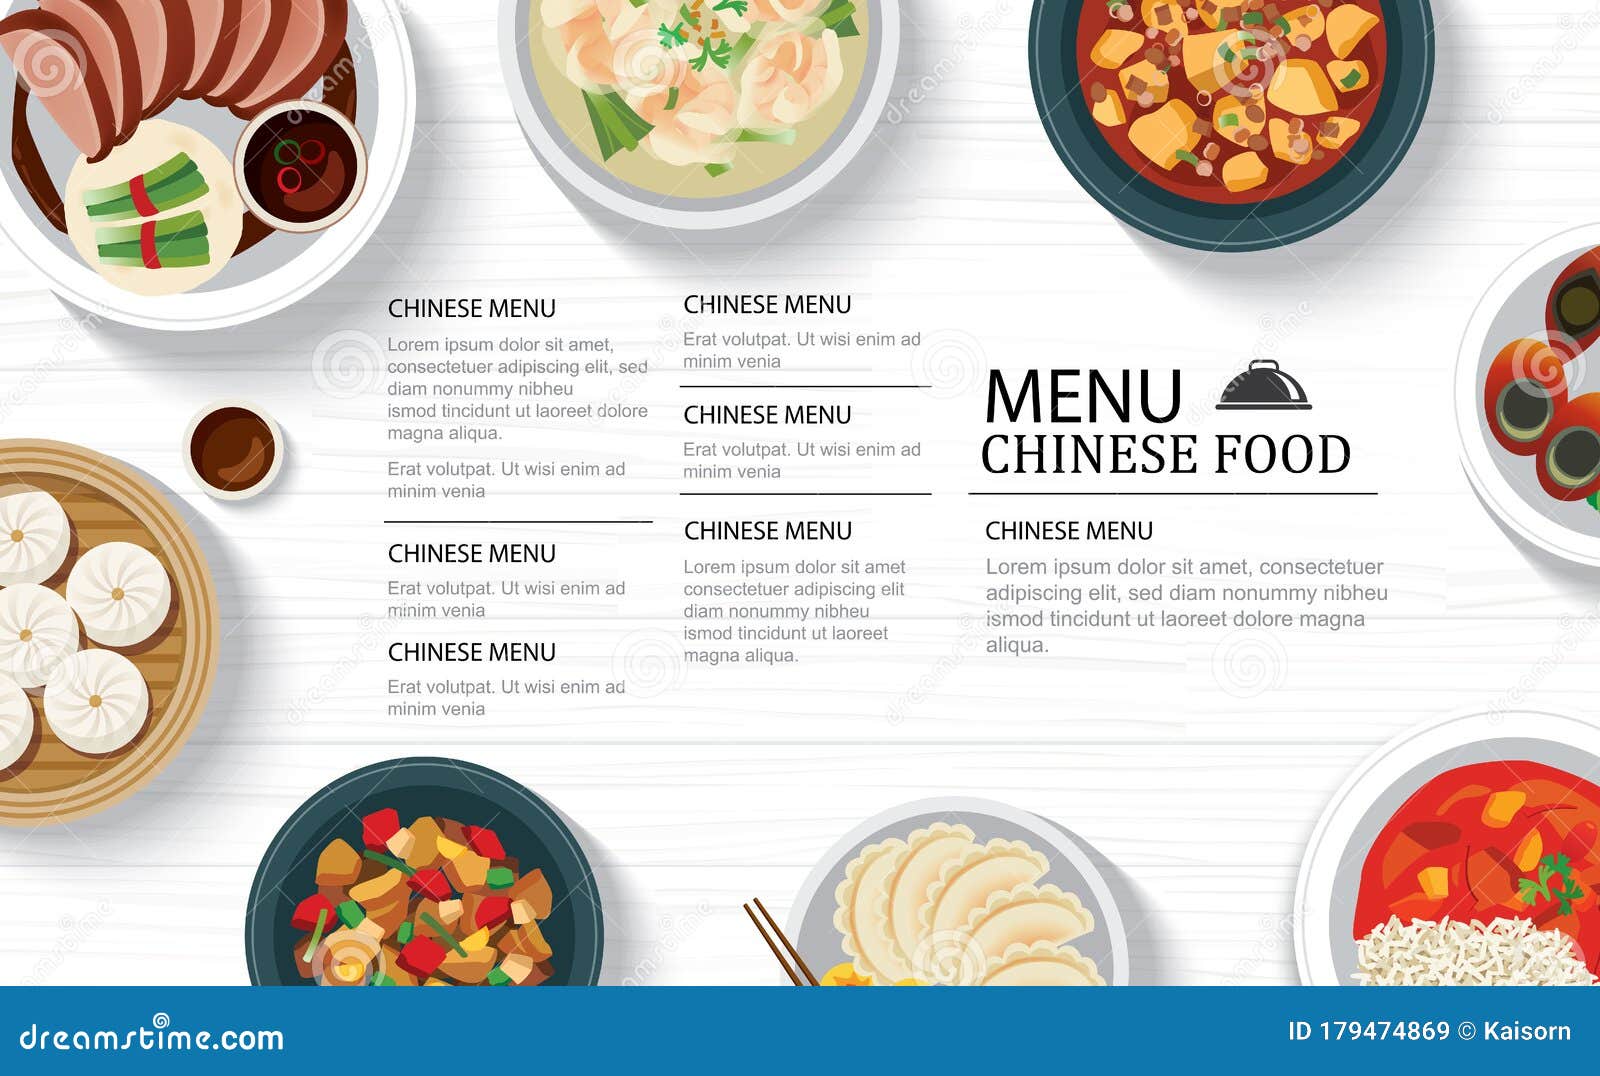 Chinese Food Menu Restaurant on a White Wooden Table Top Template Throughout Asian Restaurant Menu Template